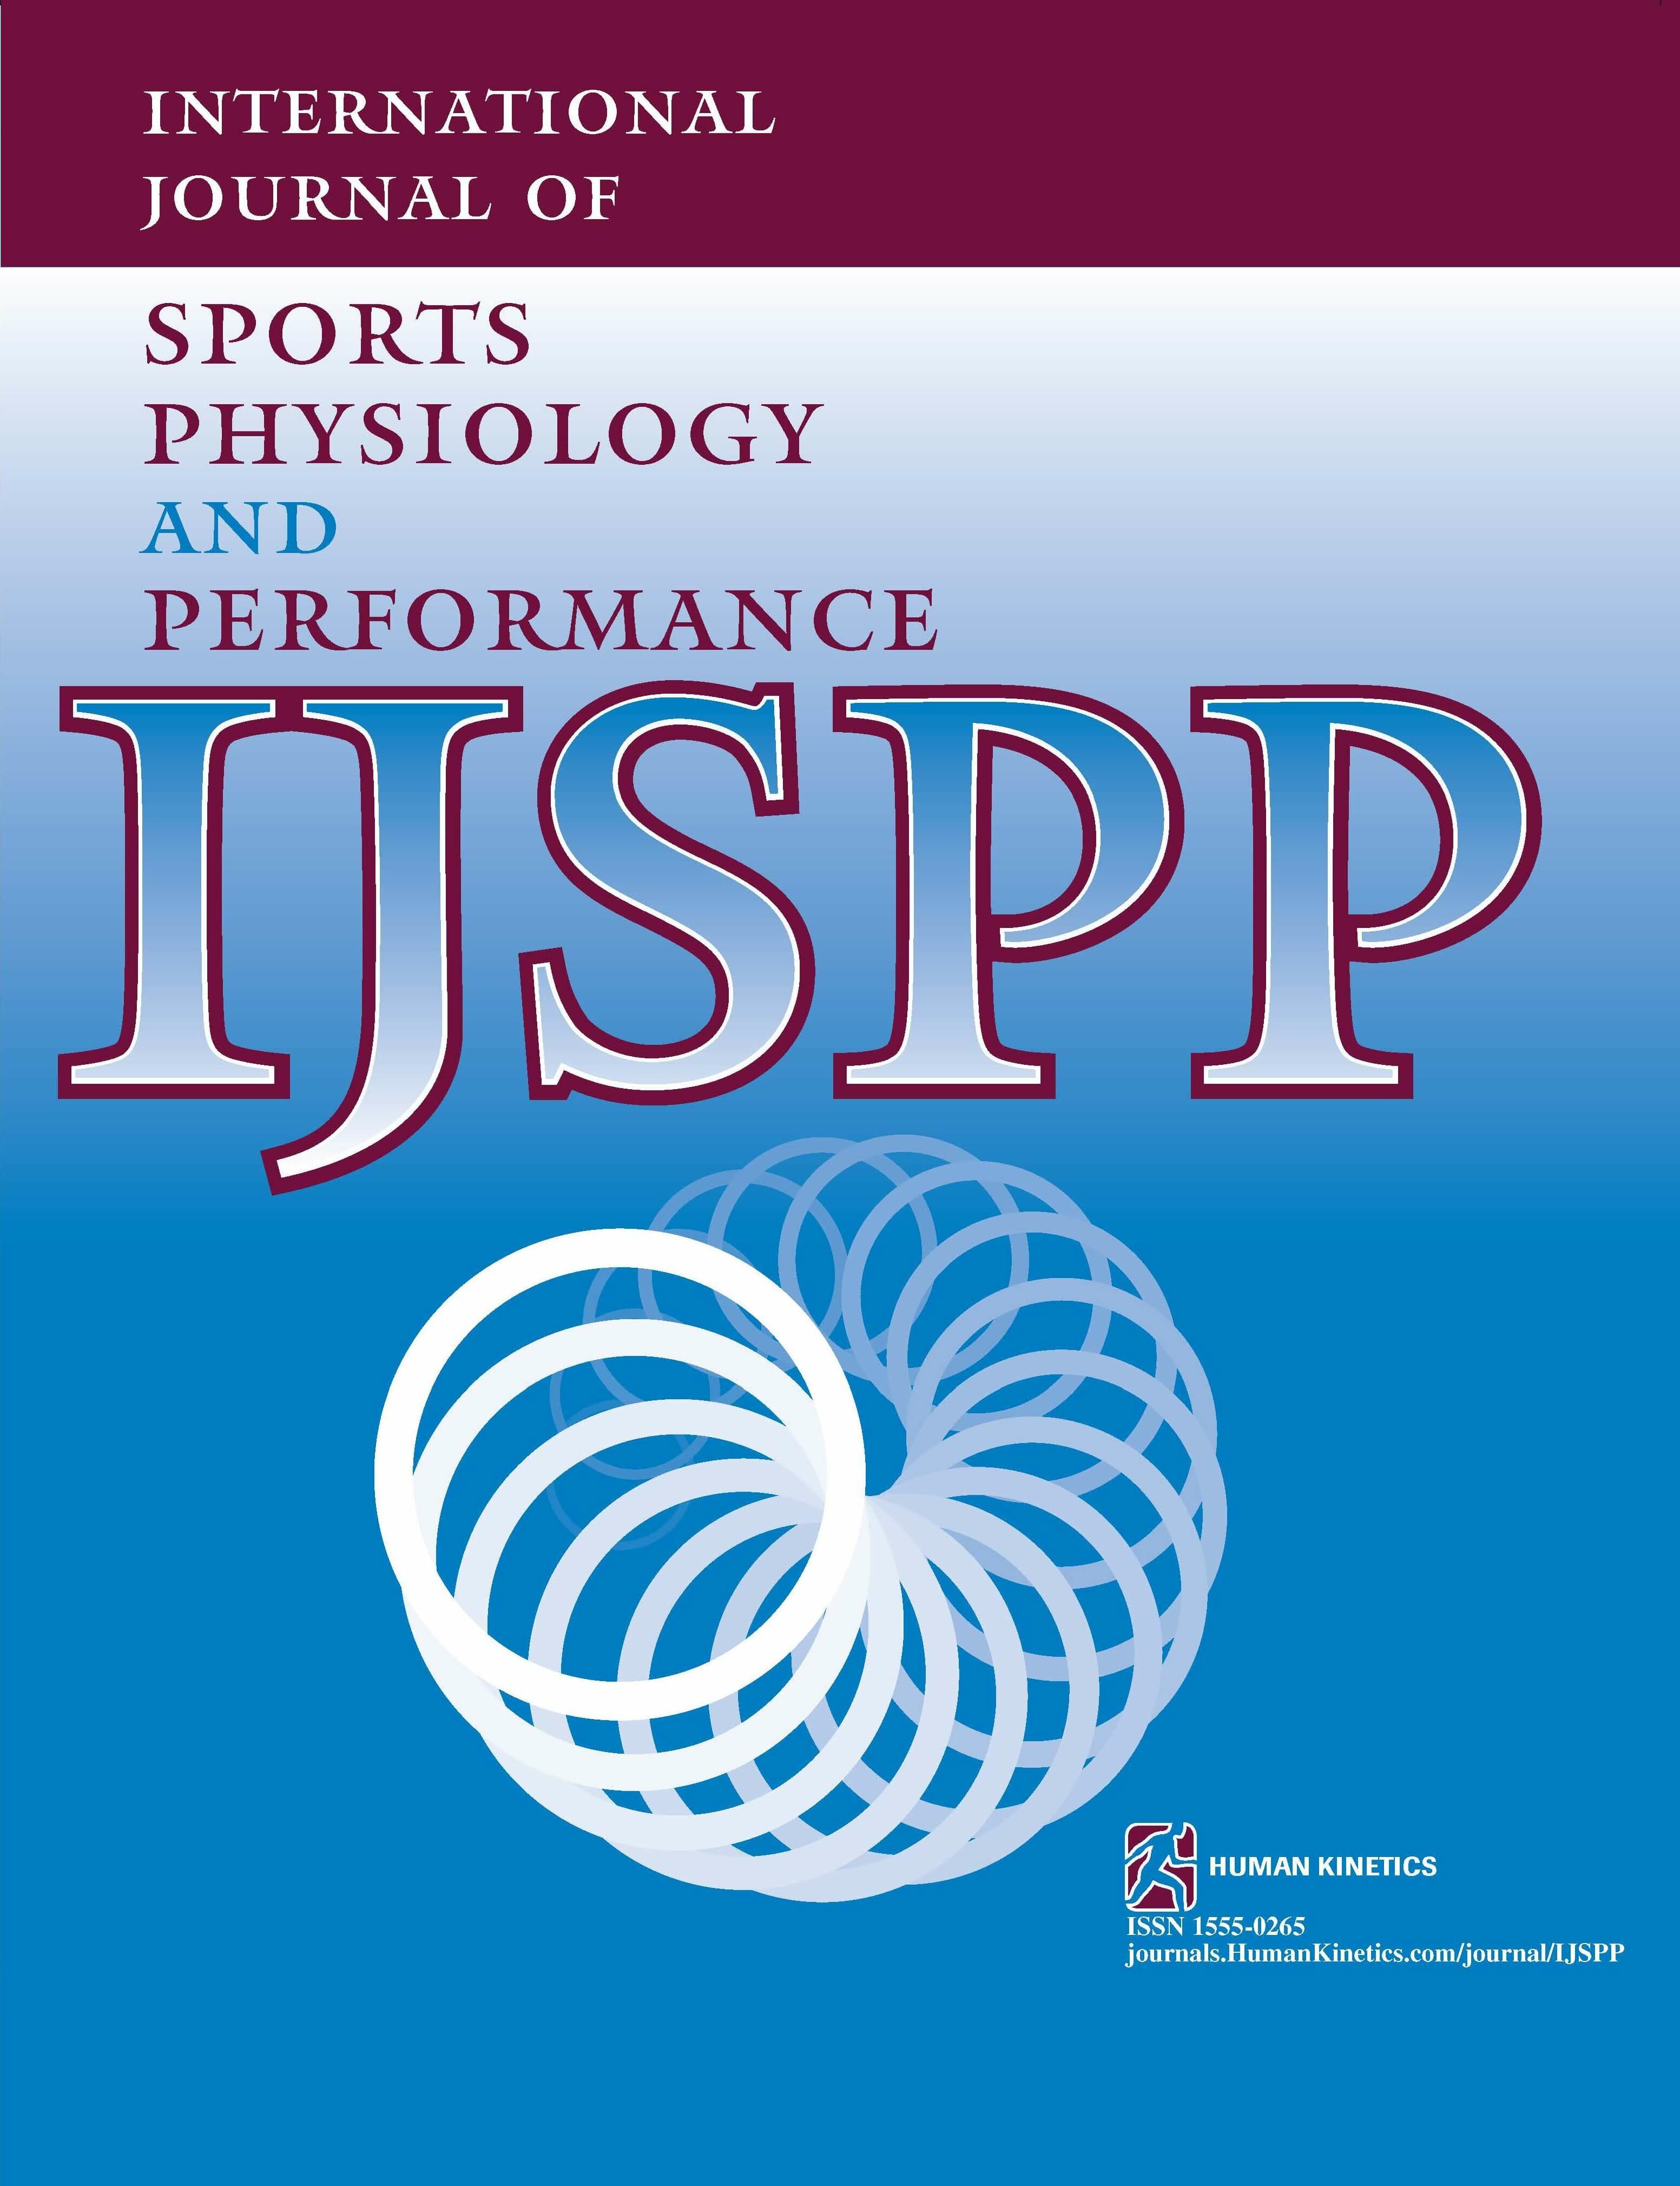 On-Field Methodological Approach to Monitor the Menstrual Cycle and Hormonal Phases in Elite Female Athletes